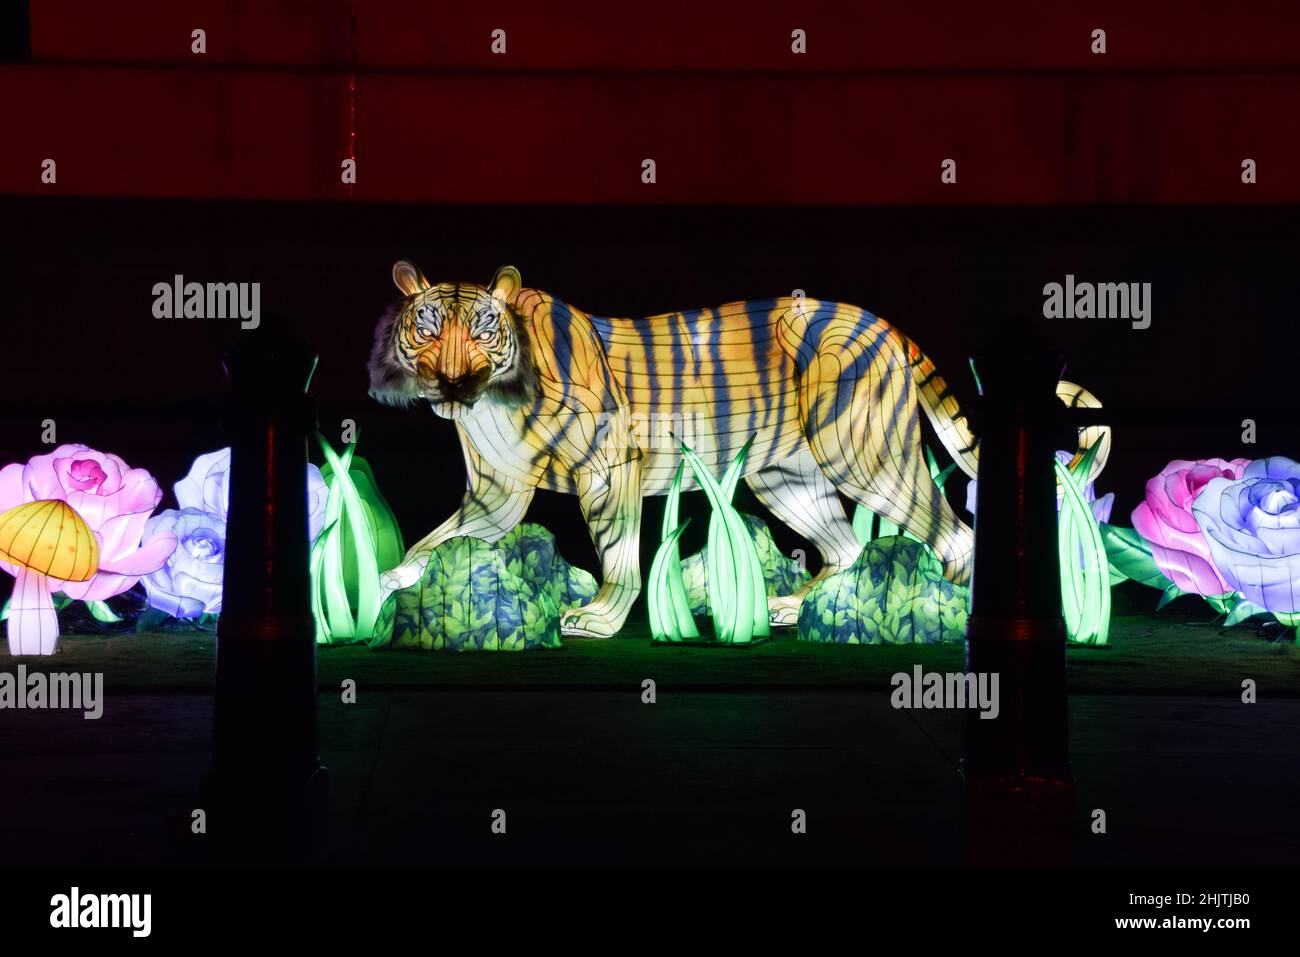 London, UK 31st January 2022. An illuminated tiger lantern in Trafalgar Square in celebration of Chinese New Year. This year marks the Year of the Tiger. Credit: Vuk Valcic / Alamy Live News Stock Photo